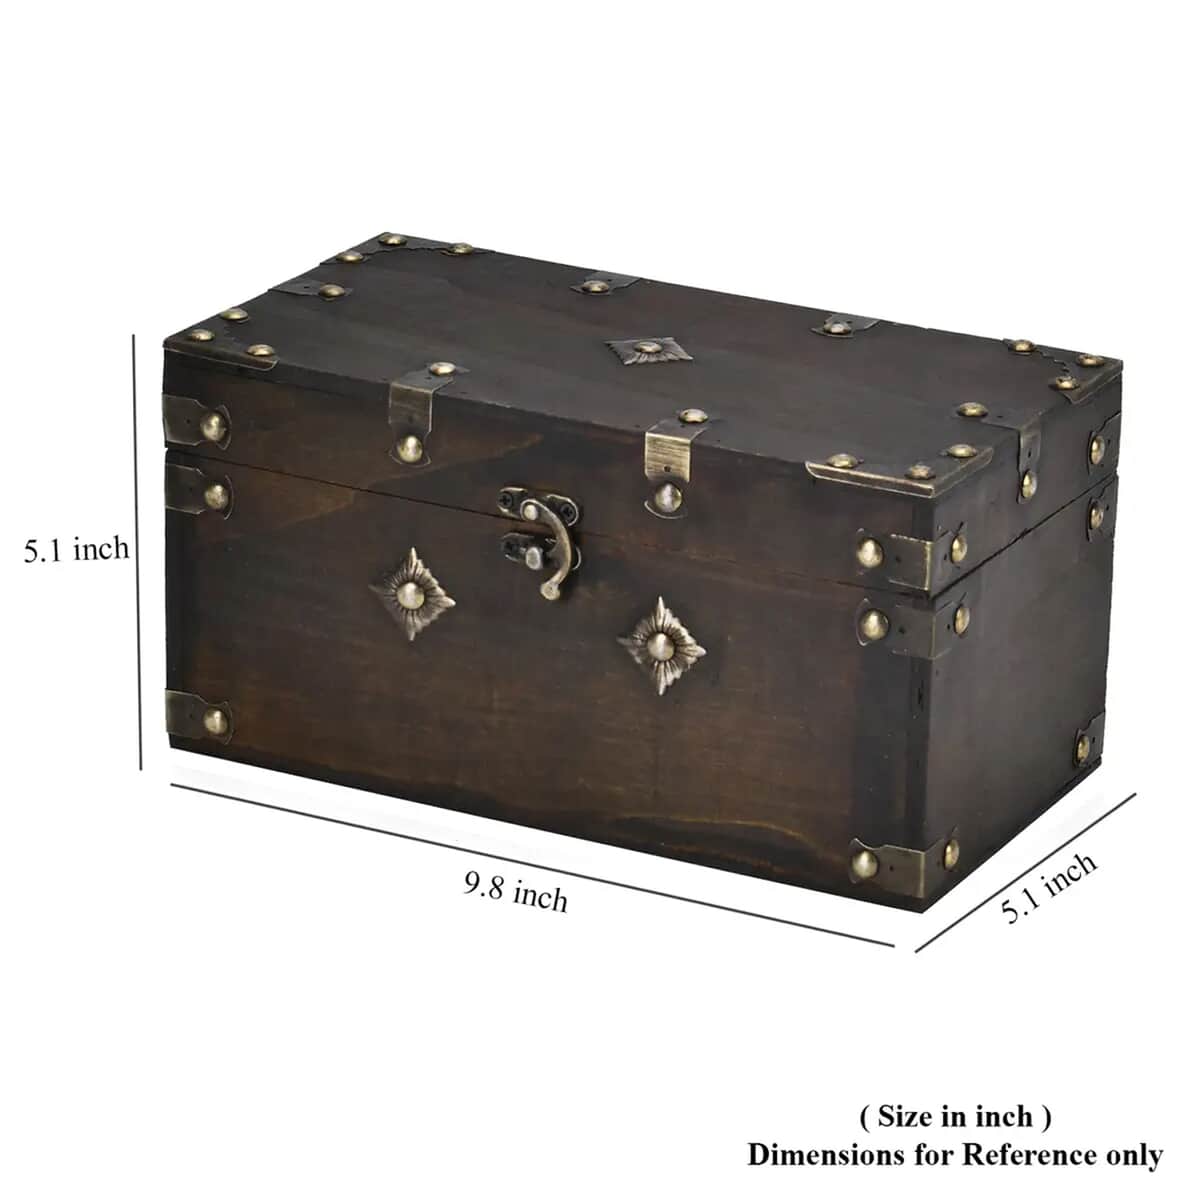 Solid Brown European Style Wooden Box with Decorative Metal Dots (9.8"x5.1"x5.1") image number 5